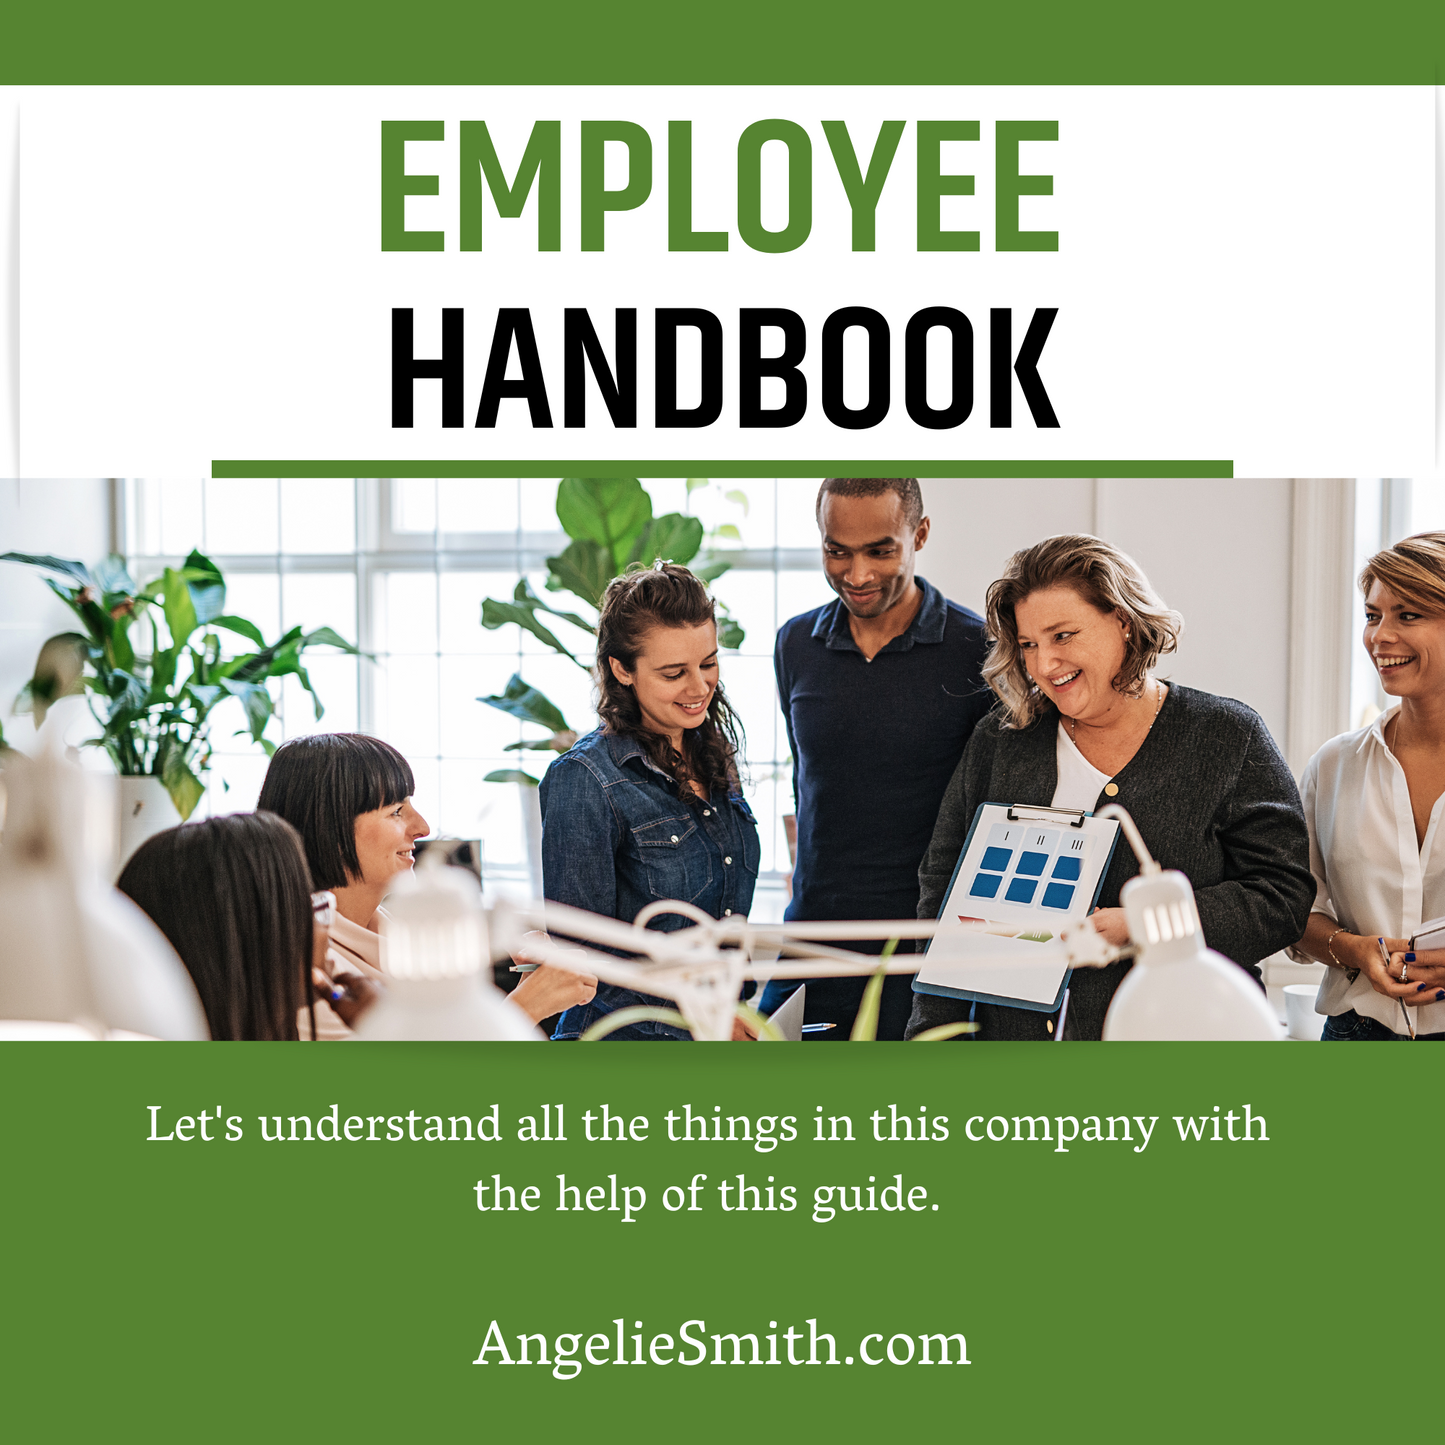 Employee Handout Template, Employee Welcome Package | New Employee Onboarding Handbook | Small Business Resources| New Hire | HR Manual | Onboarding Checklist, 42 pages